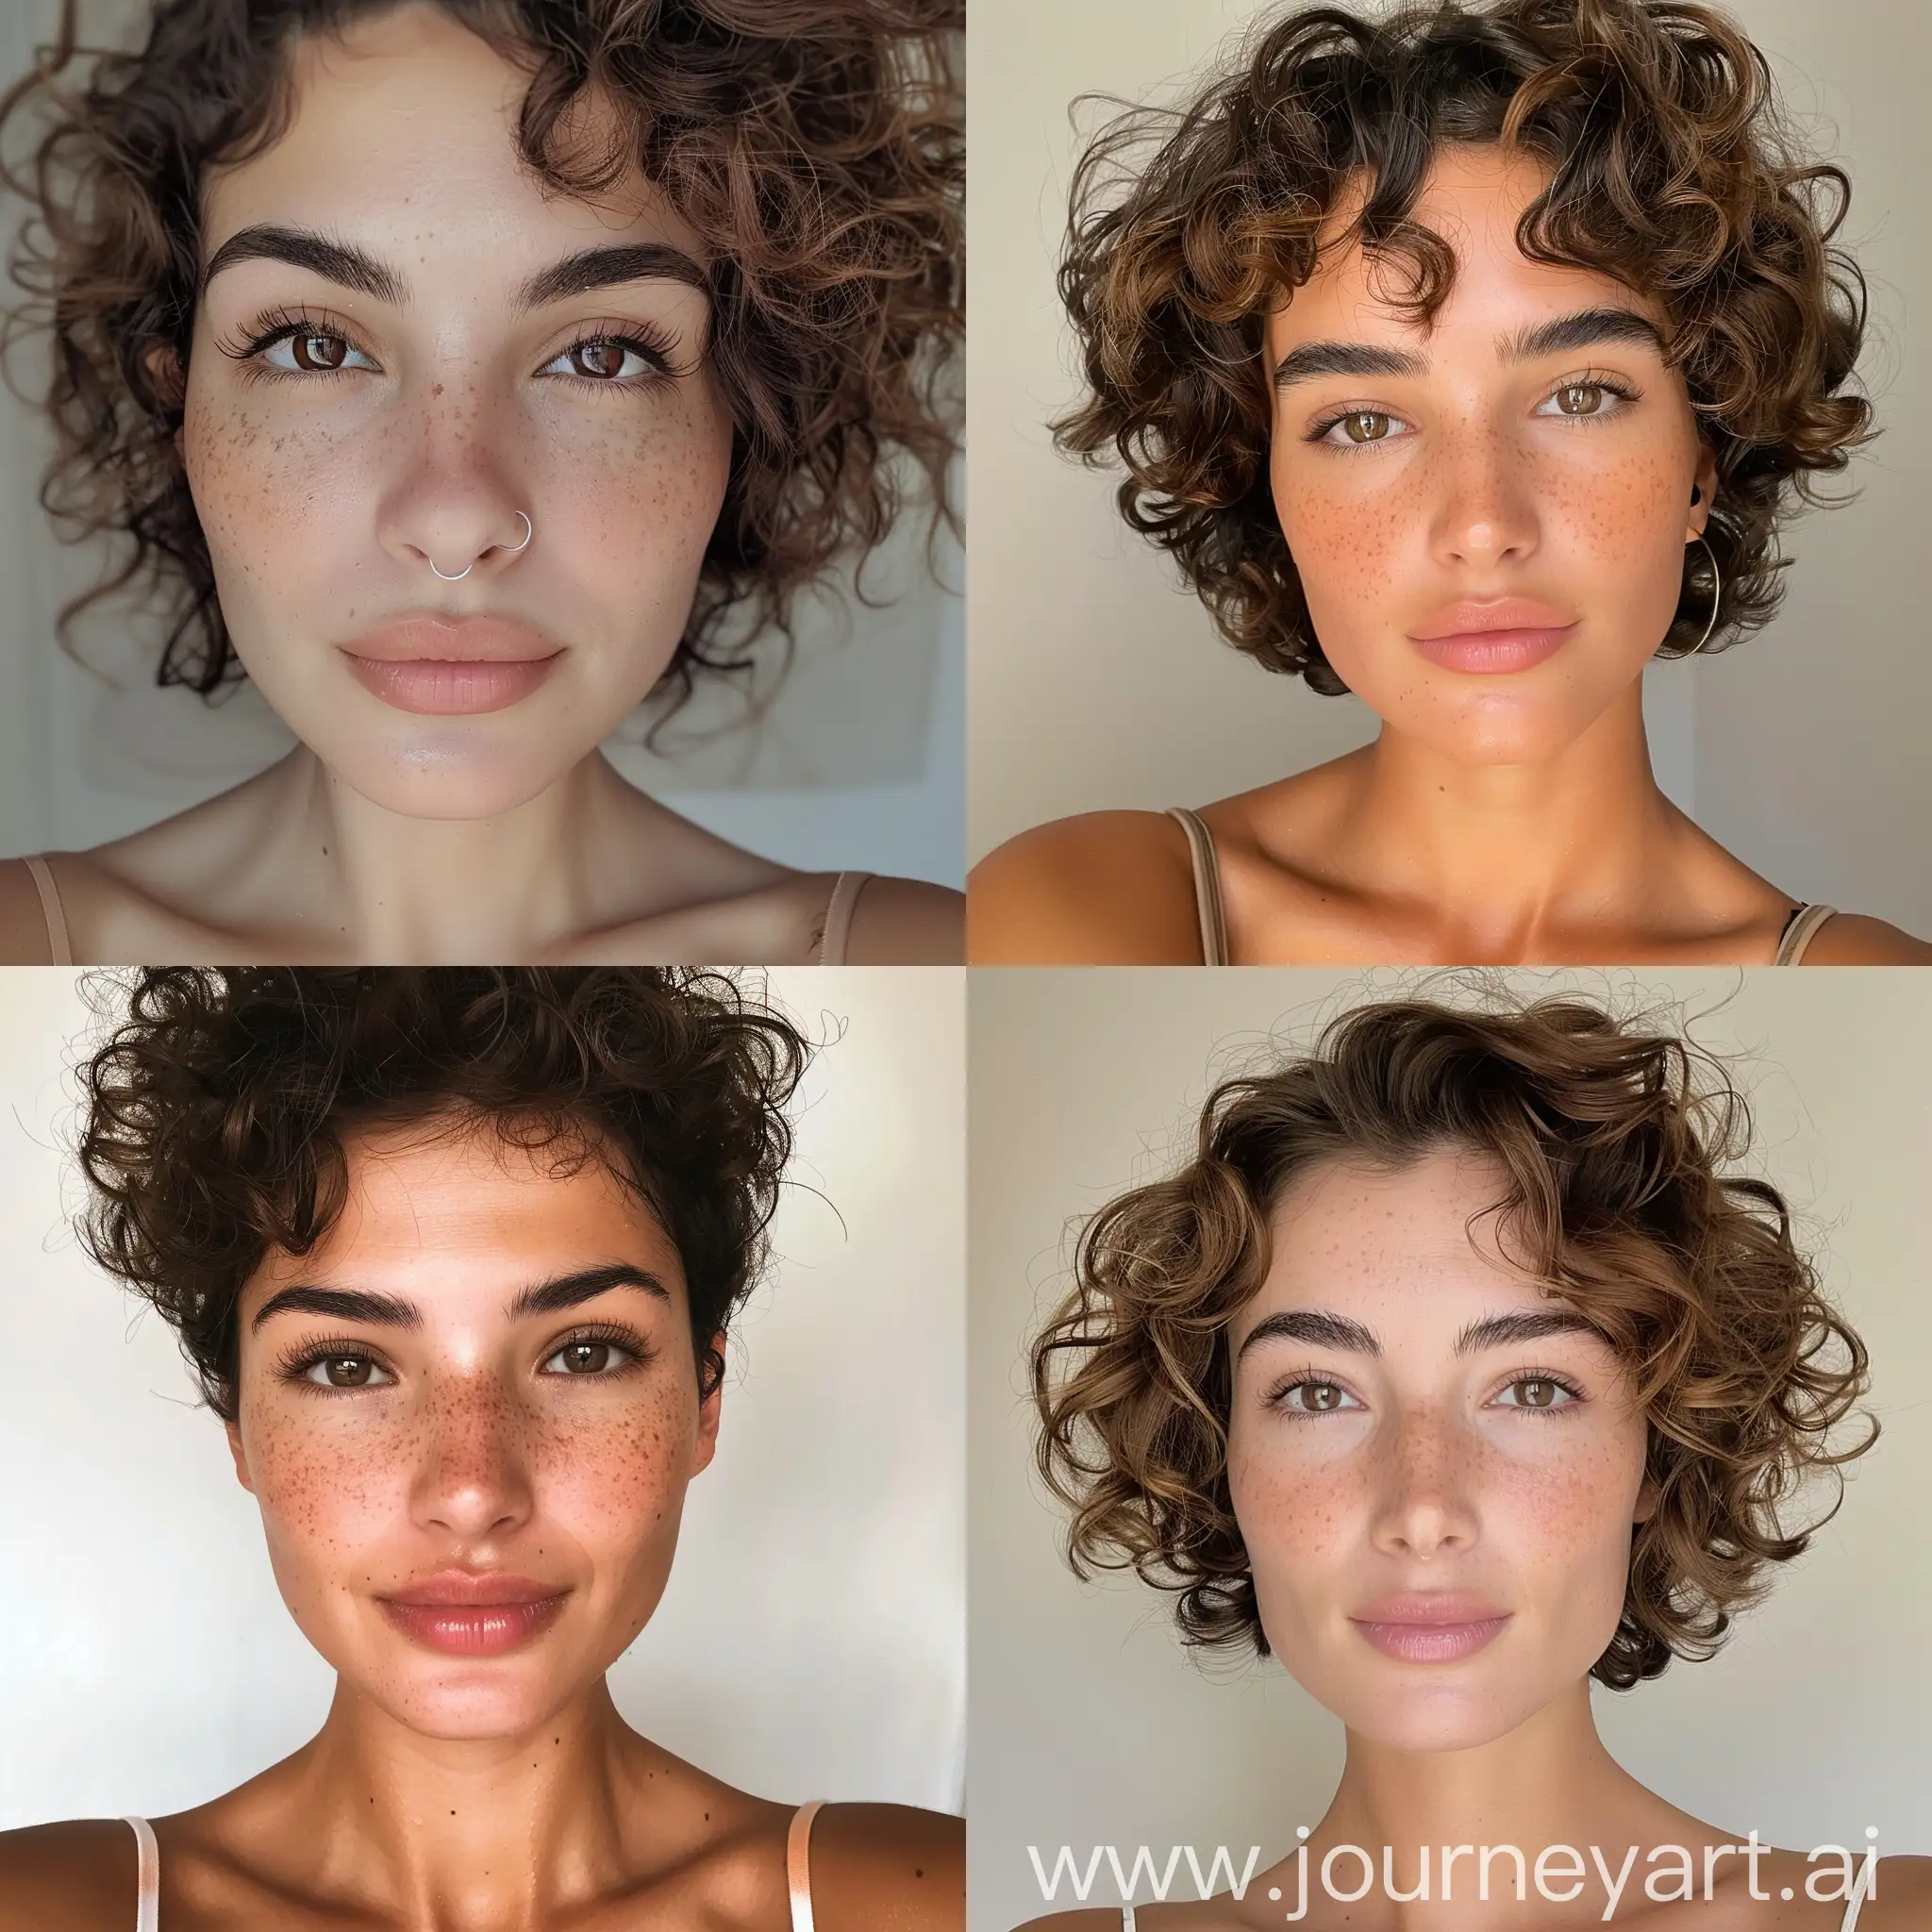 Spanish american female, 28y.o, instagram model, light skin, soft nose, thin perfect face, eyebrows, female, short brown hair, curly hair, brown eyes, slim